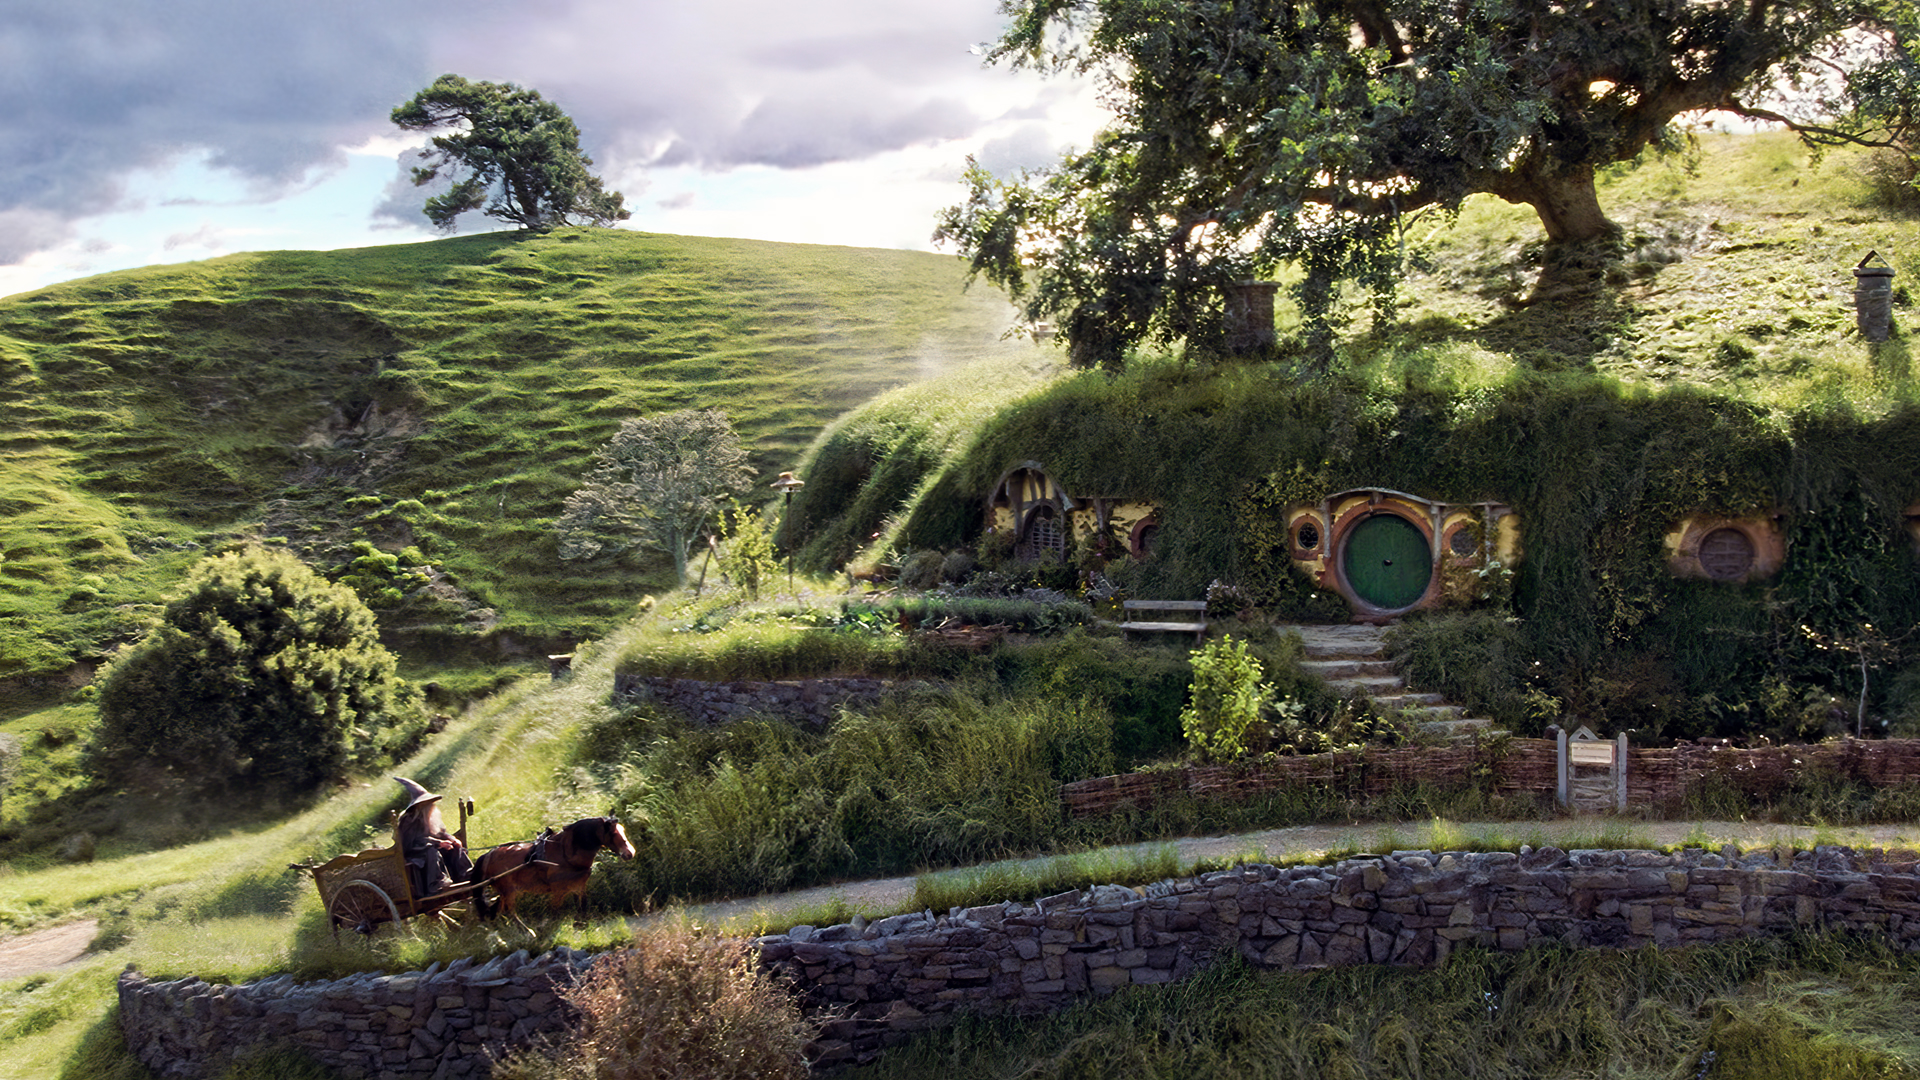 The Lord Of The Rings The Fellowship Of The Ring The Shire Bag End Gandalf Hills Trees House Horse W 1920x1080